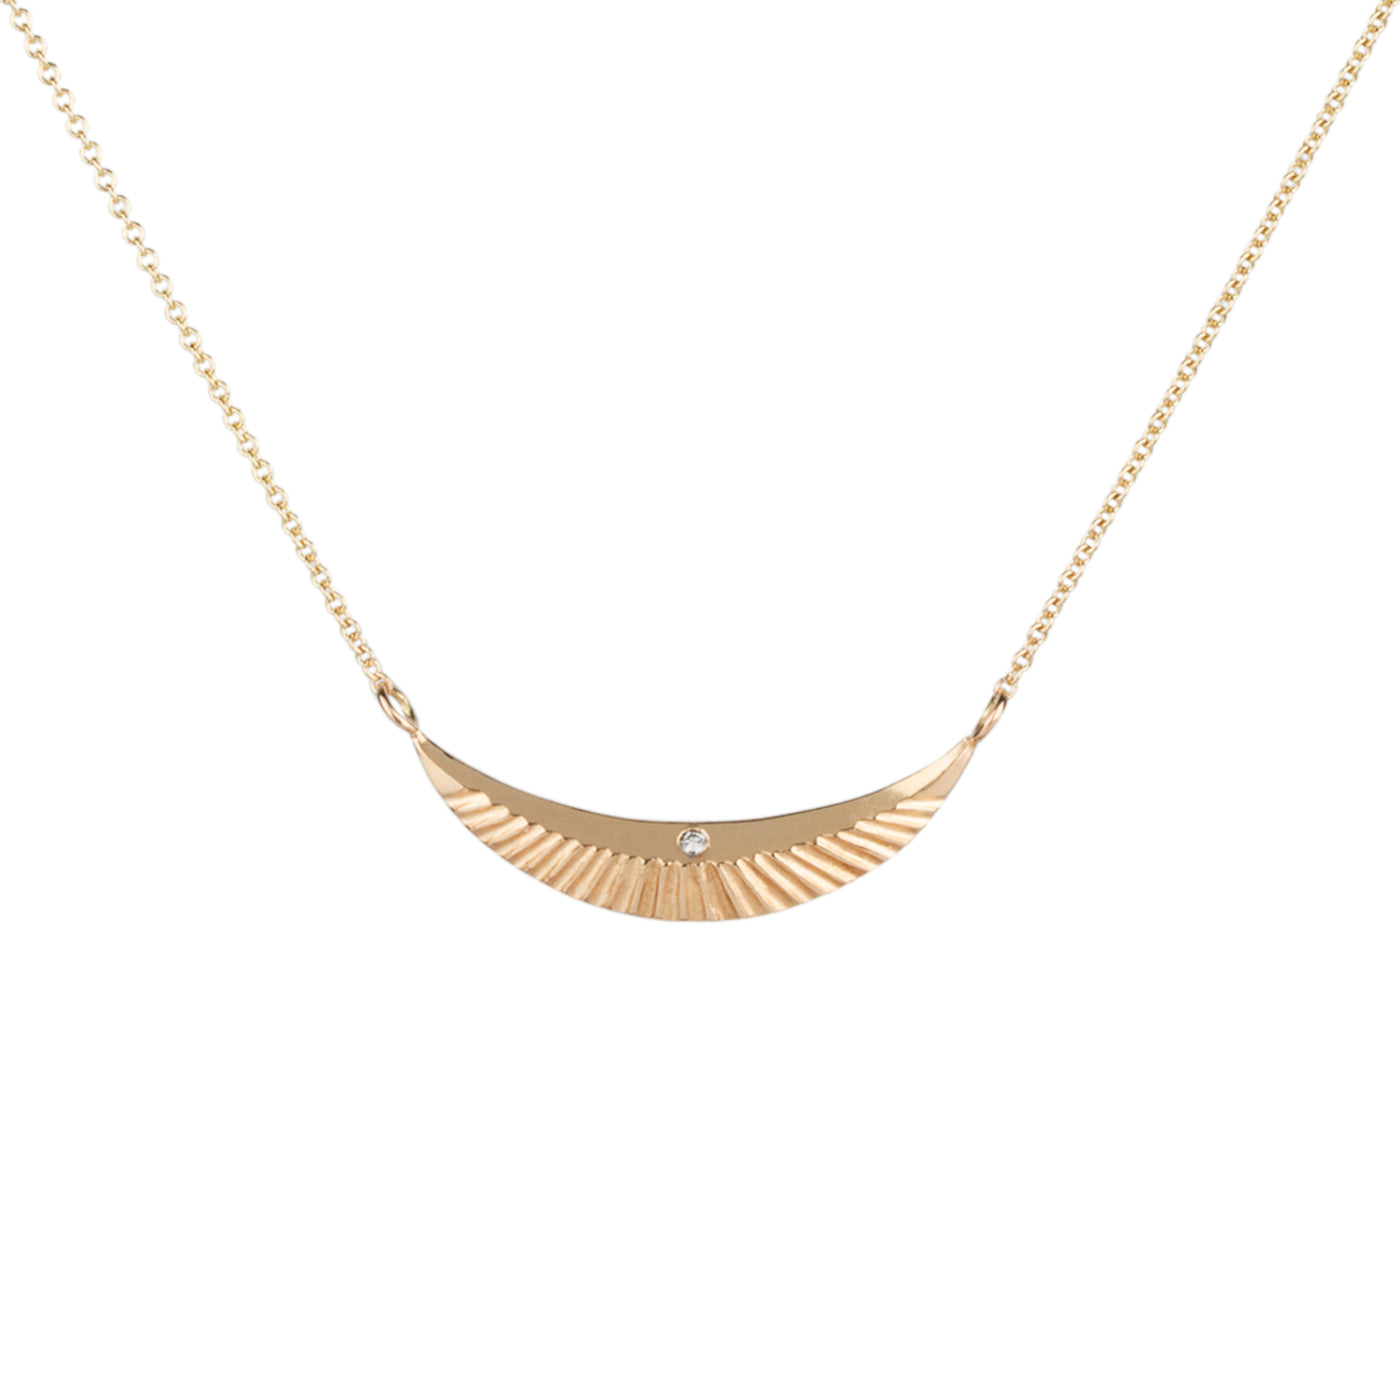 Gold crescent pendant with sunburst textured bottom and polished top and a single diamond. 